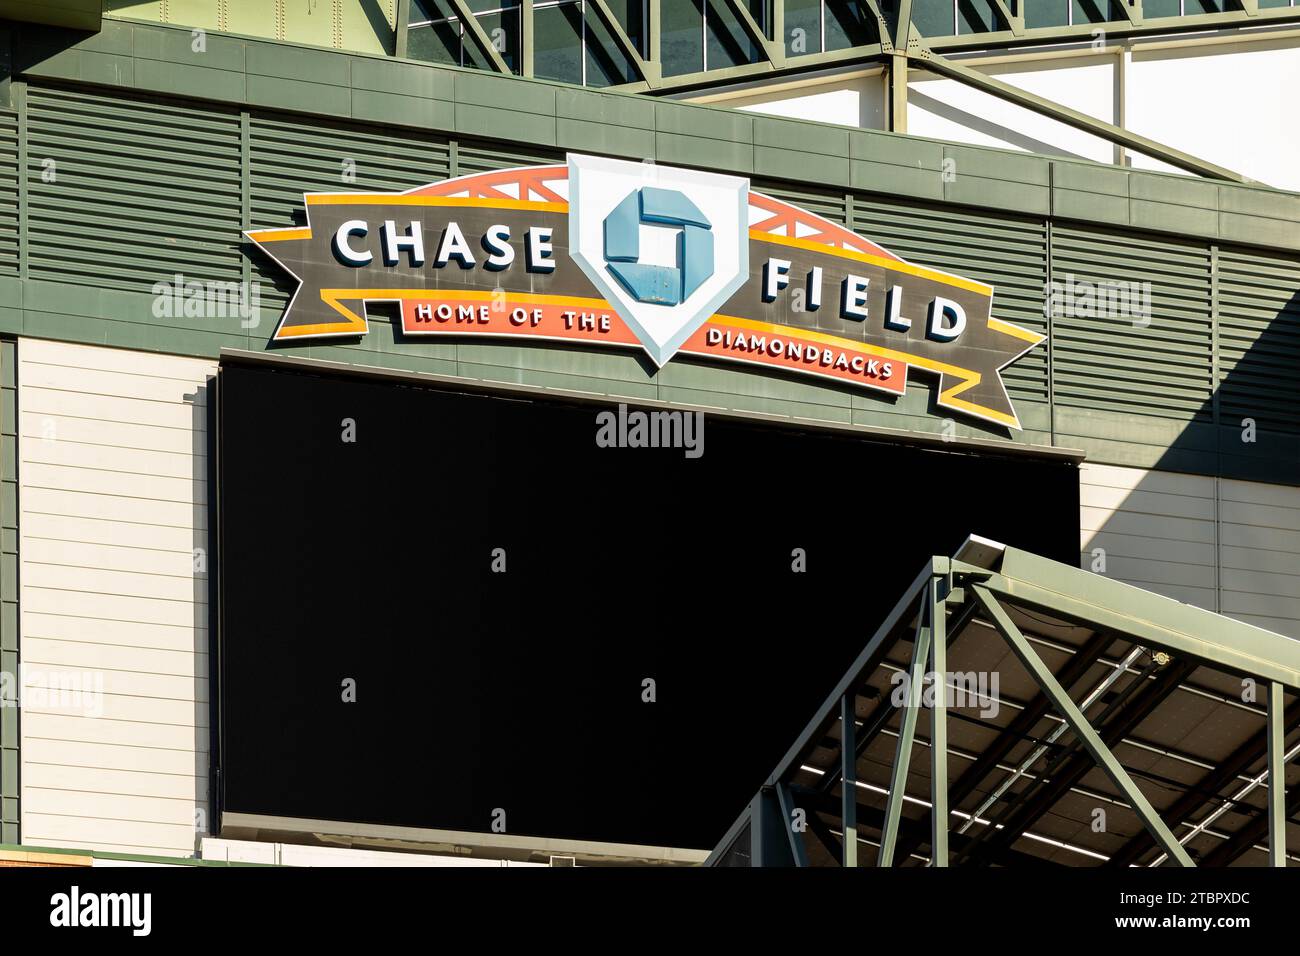 Chase Field is located in downtown Phoenix and home to the Arizona Diamondsbacks. Stock Photo